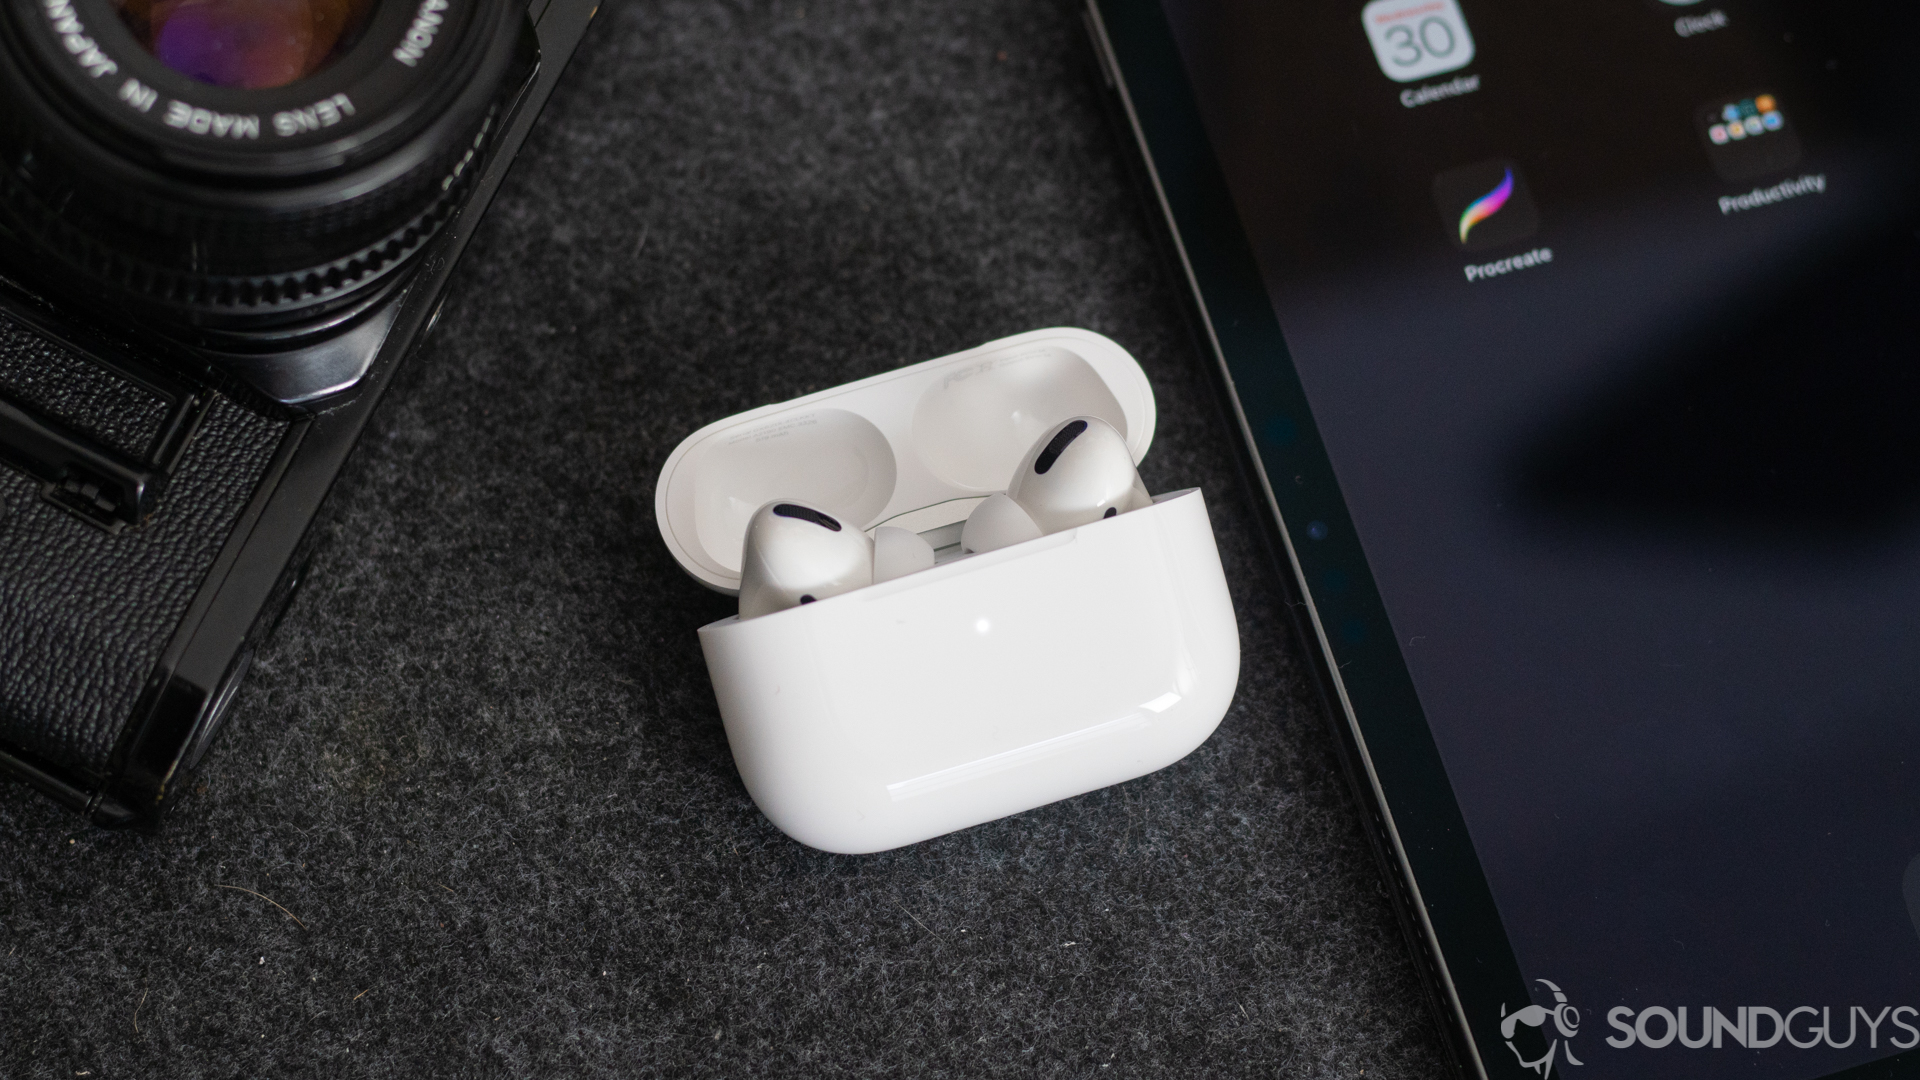 A photo of the AirPods Pro earbuds in the wireless charging case next to an iPhone and digital camera. - Apple AirPods Pro vs Sony WF-1000XM3 